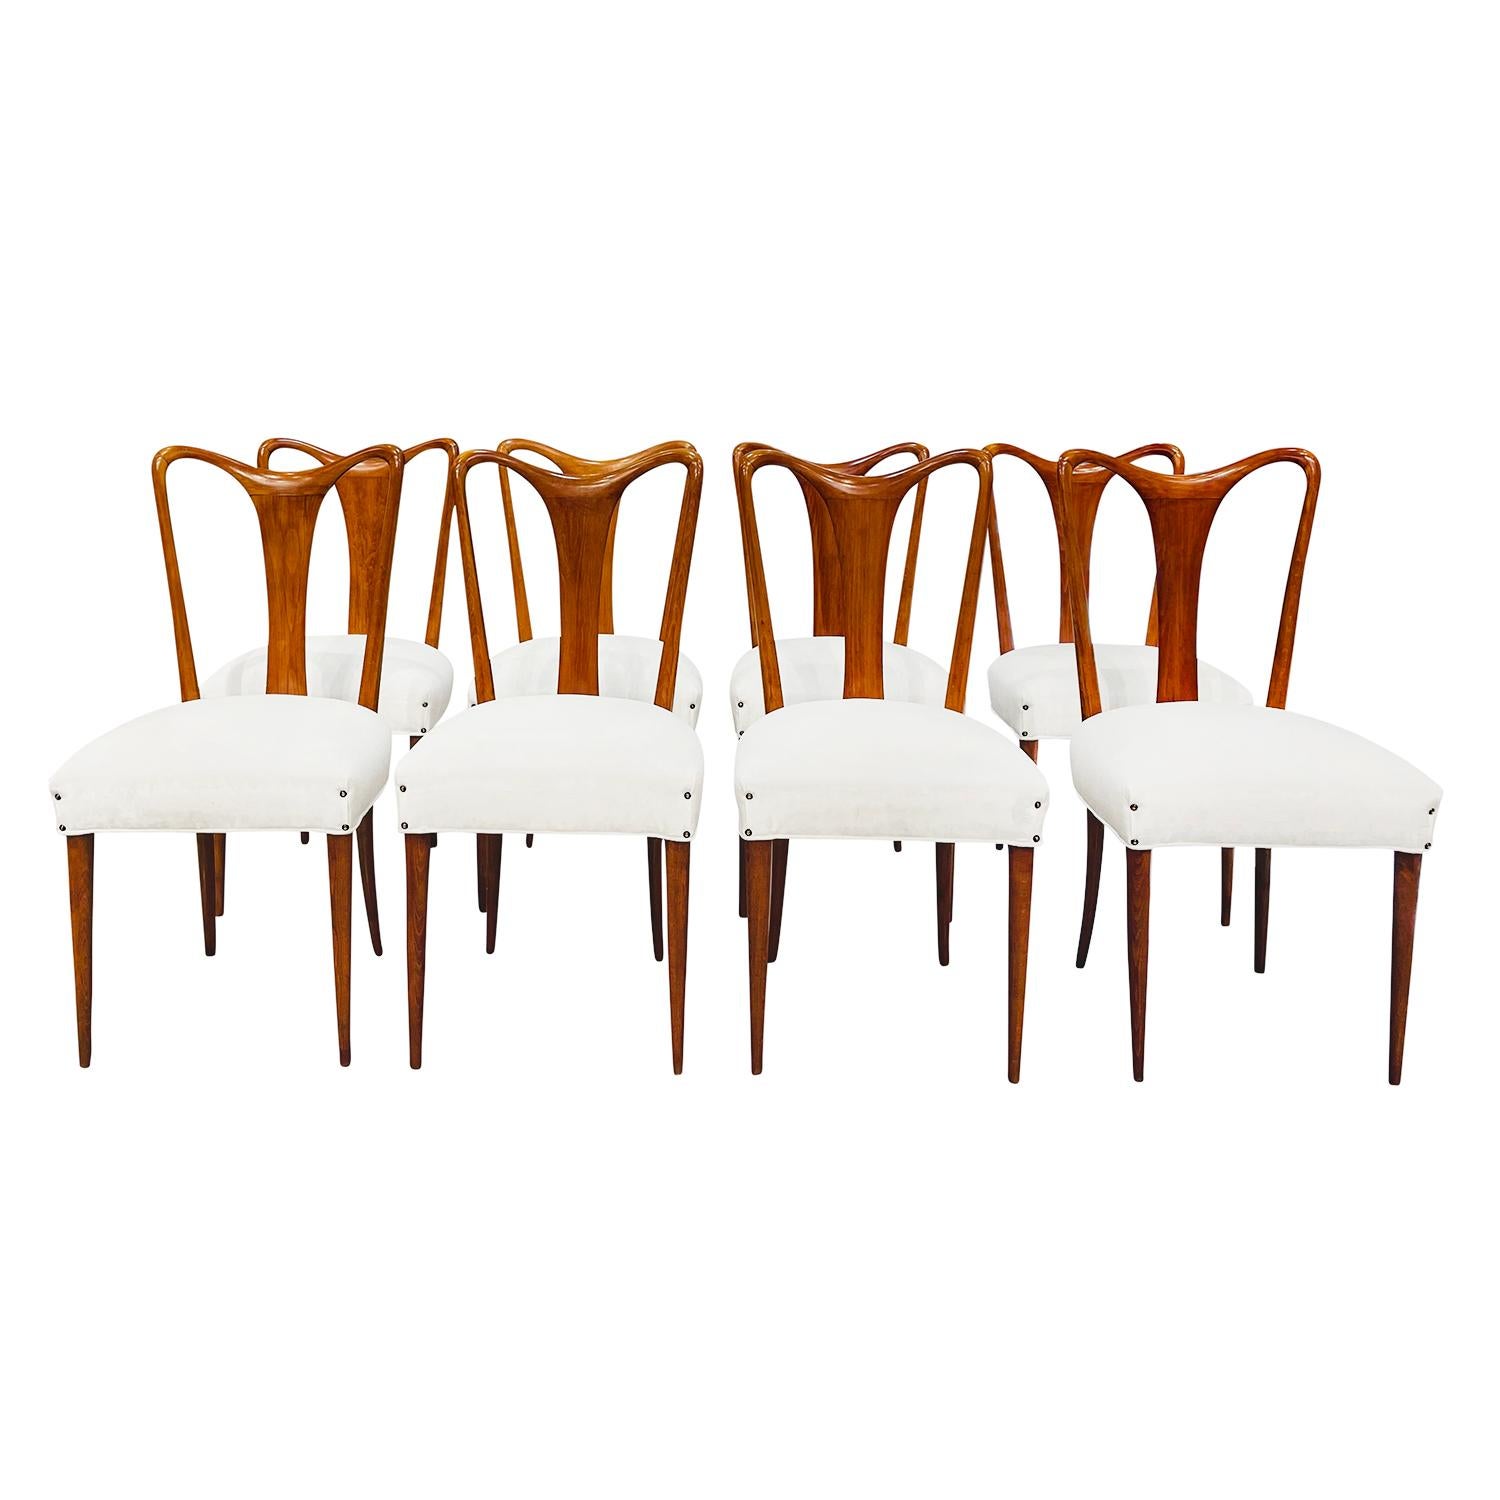 A vintage set of eight Mid-Century modern Italian dining room chairs made of hand crafted polished Rosewood, designed by Vittorio Dassi in good condition. The arched seat backrest of the sculptural side chairs are spindled, standing on four tapered